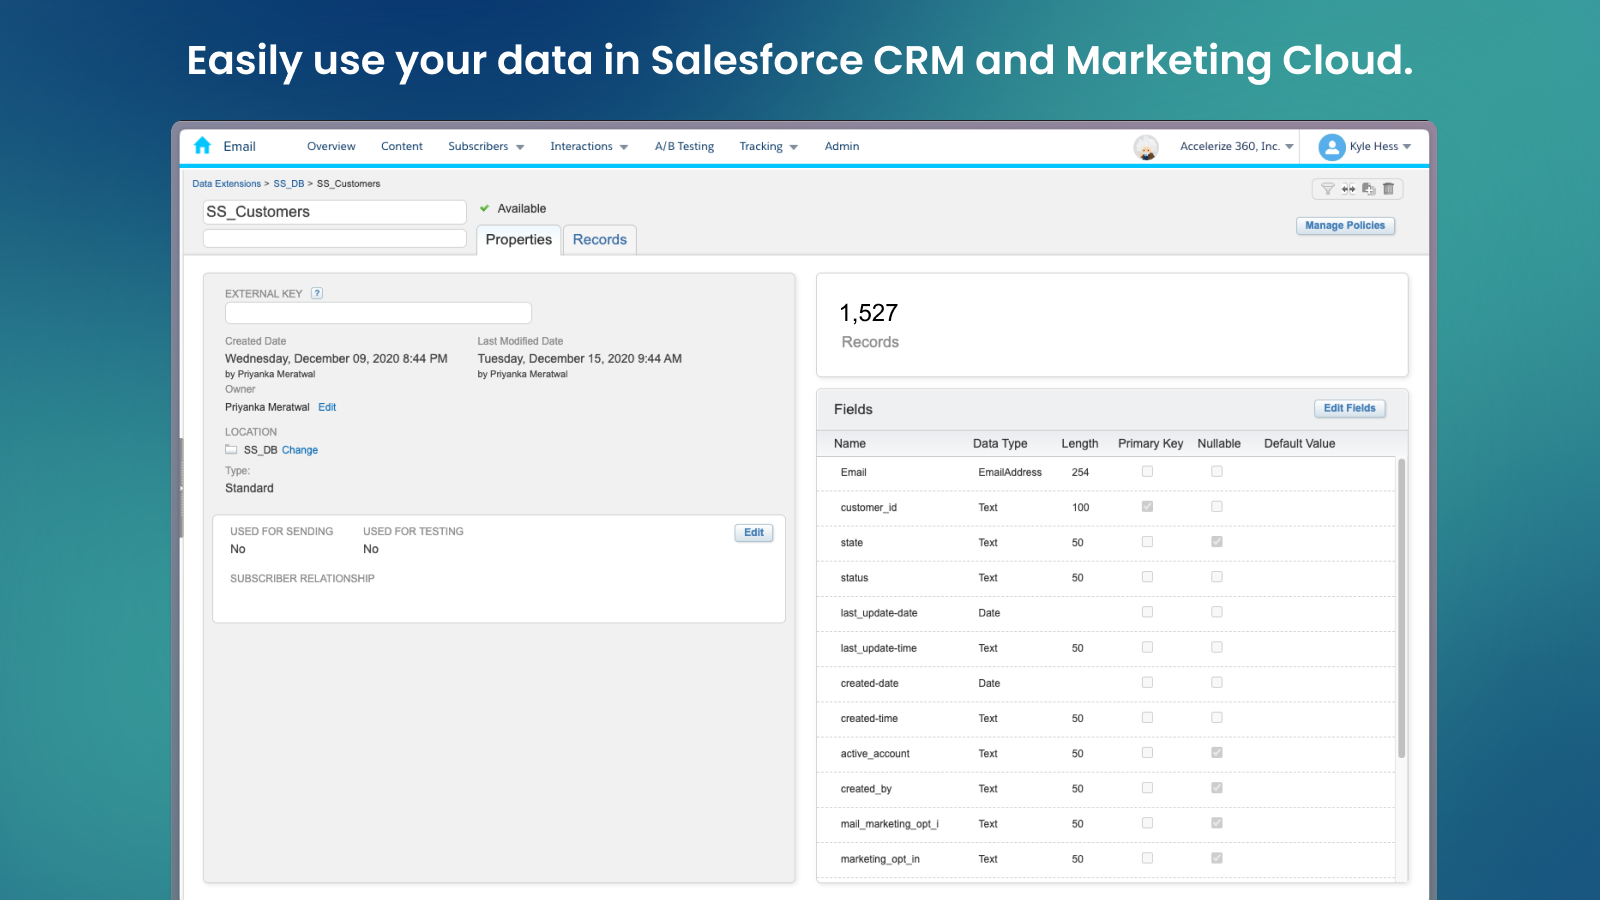 Easily use your data in Salesforce CRM and Marketing Cloud.